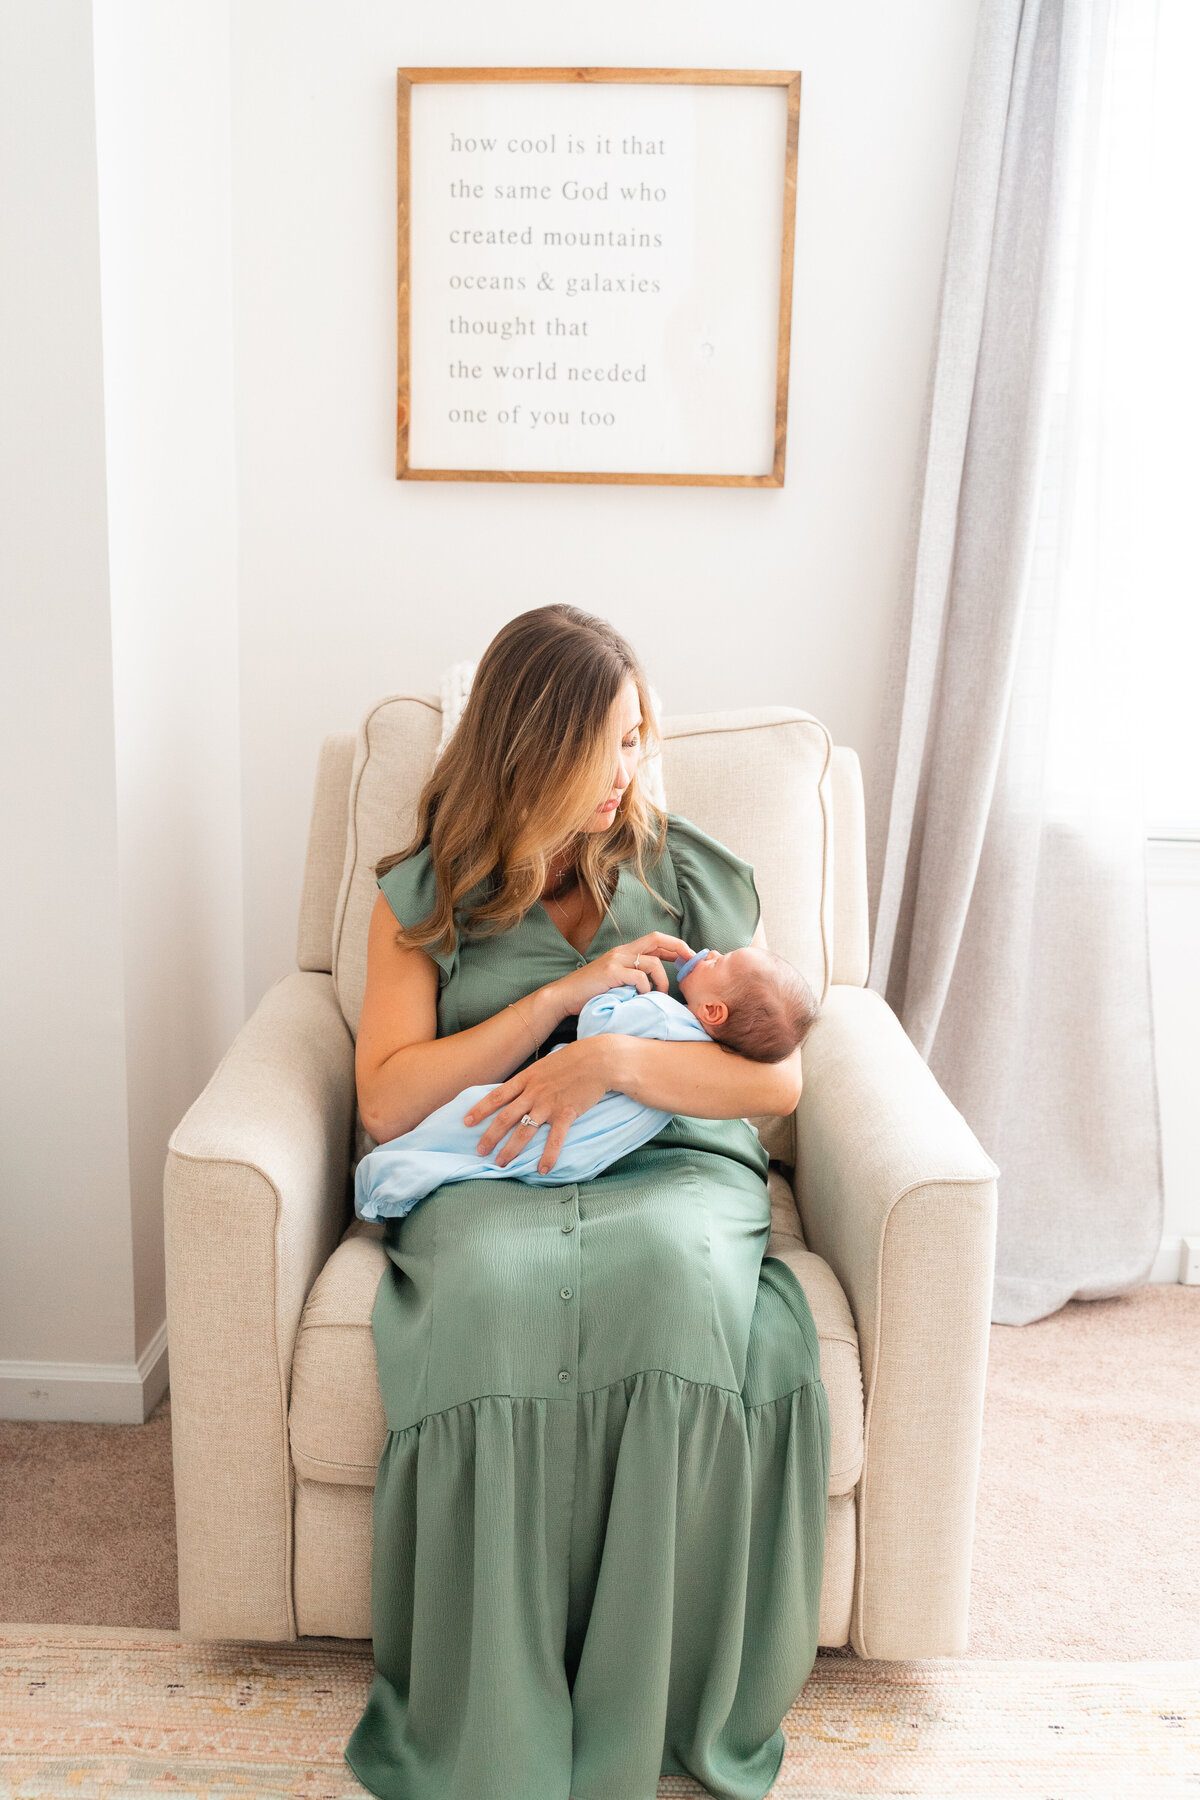 Chattanooga newborn photographer Kelley Hoagland takes lifestyle photos in-home location. Mother posed in nursery.